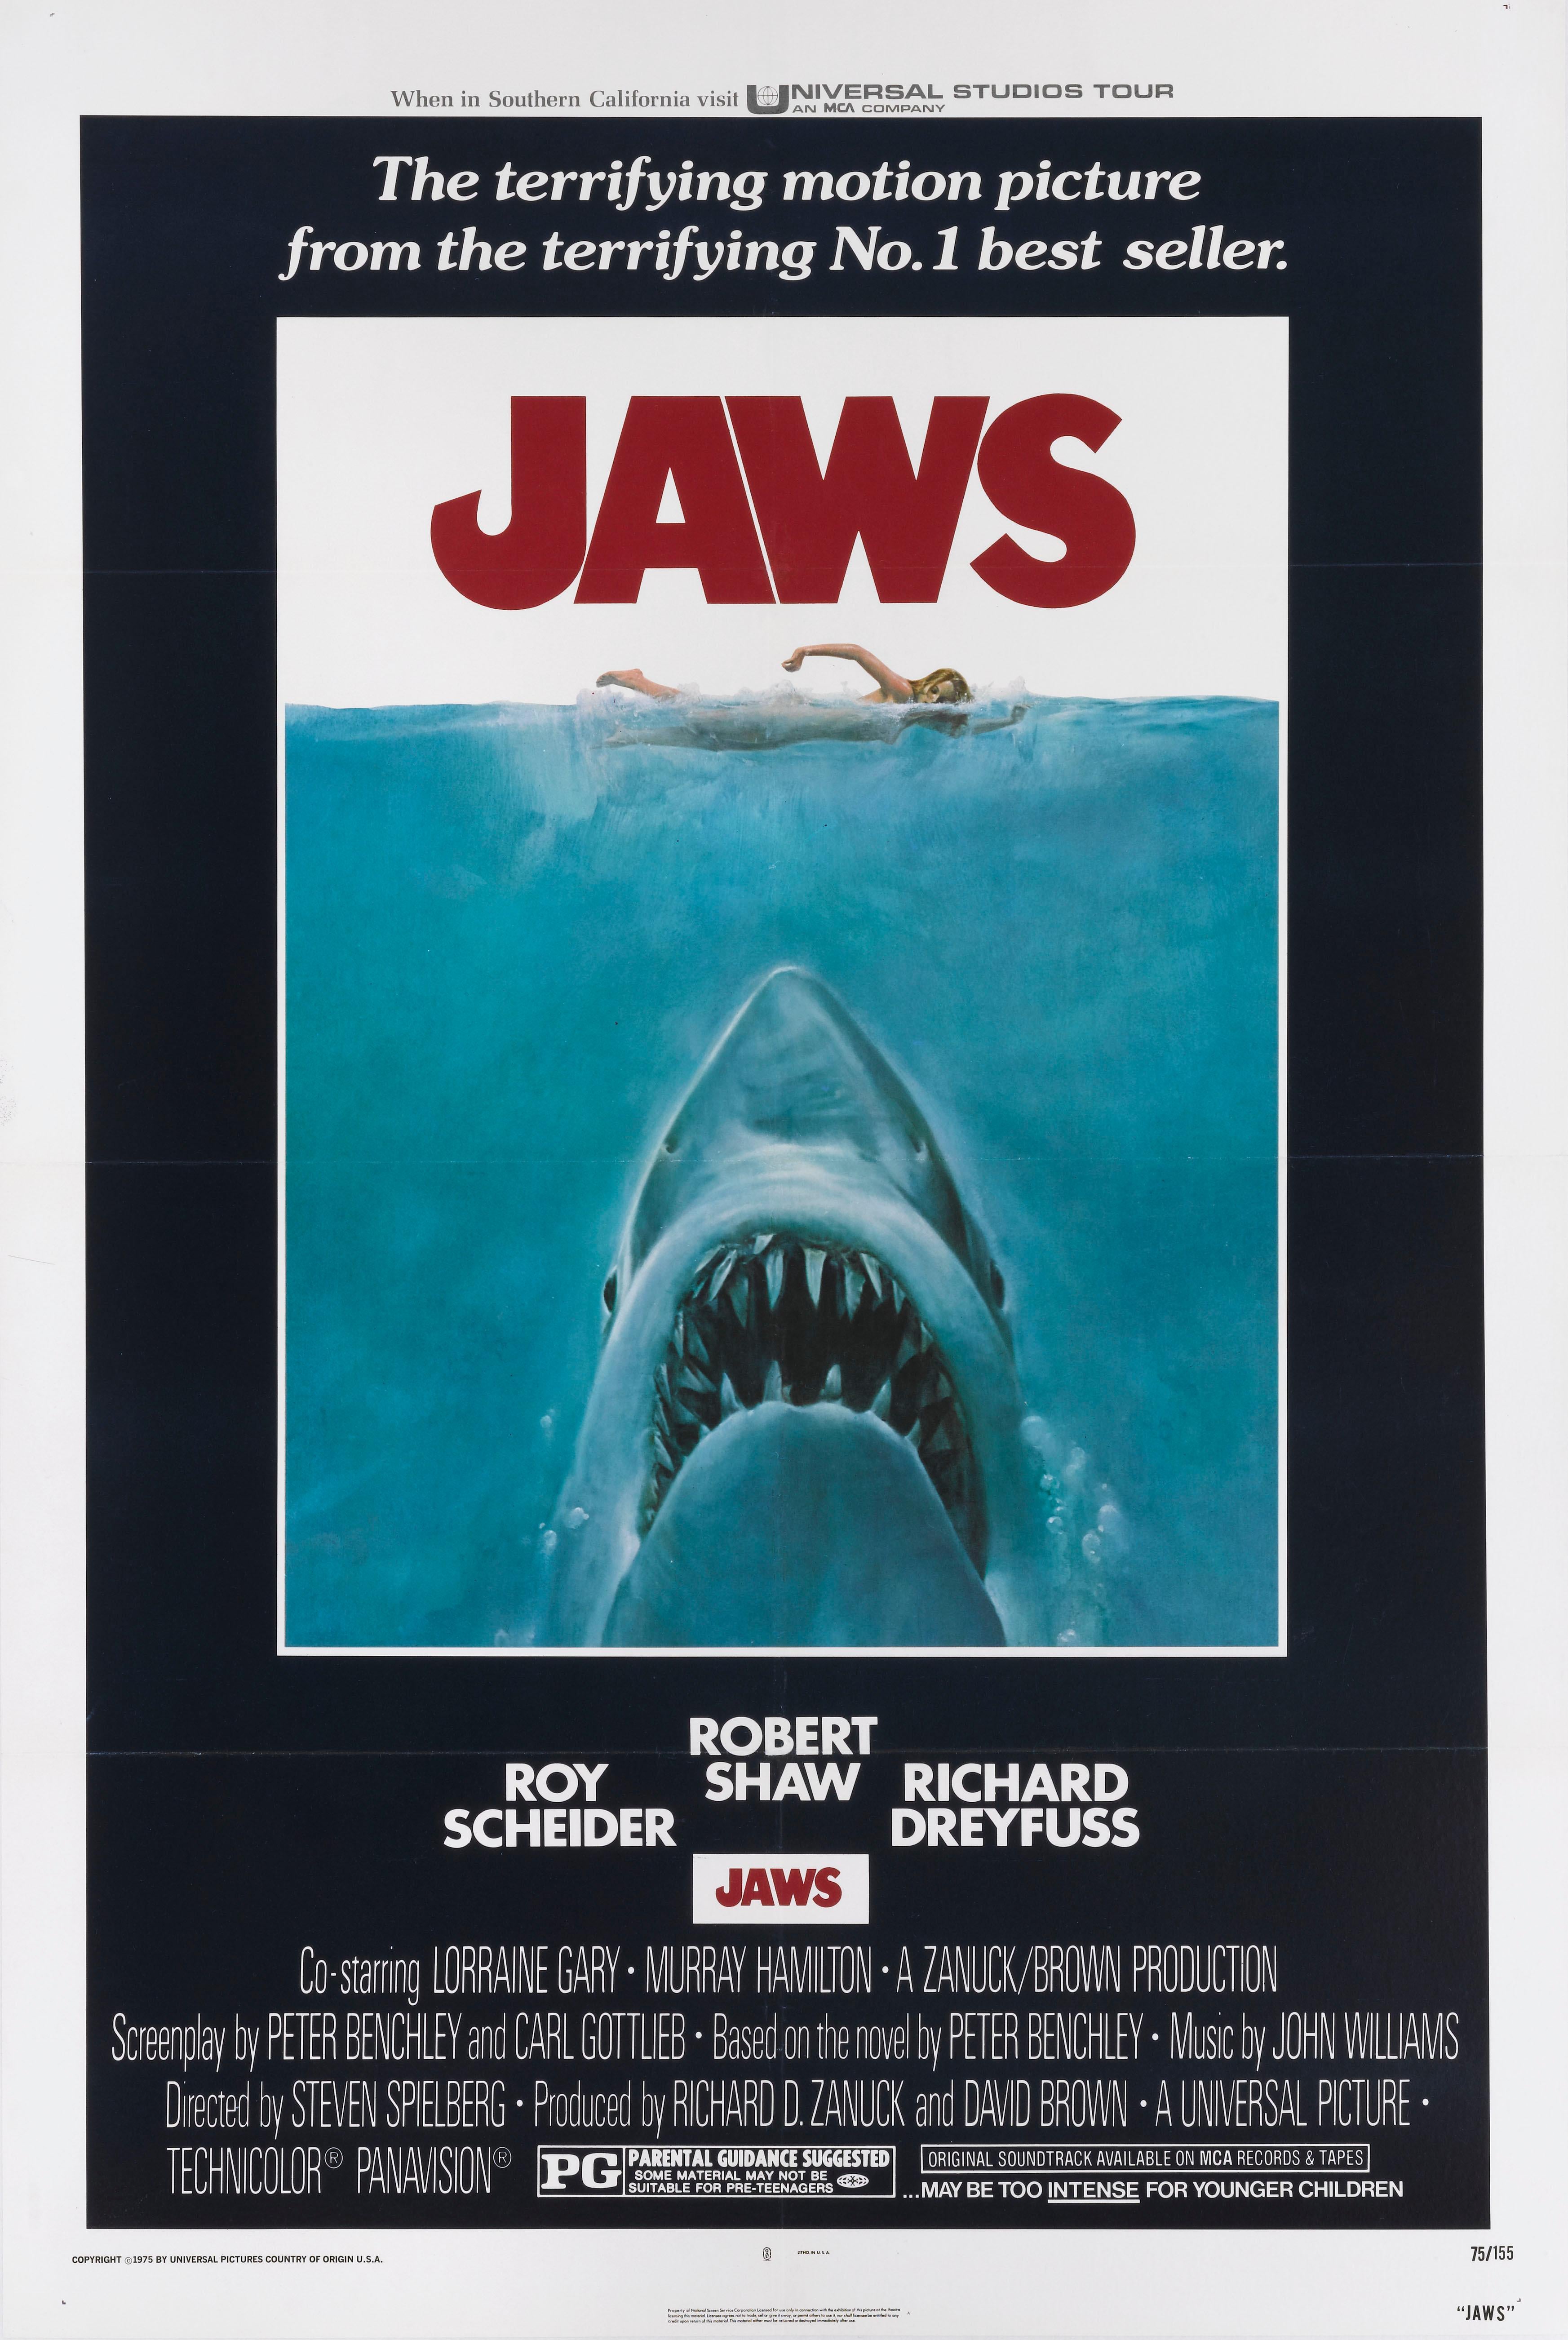 Original US film poster for Jaws (1975)
Jaws invented the summer blockbuster and was a massive hit that shattered box office records. It was the film that propelled Steven Spielberg to international fame, and frightened a whole generation out of